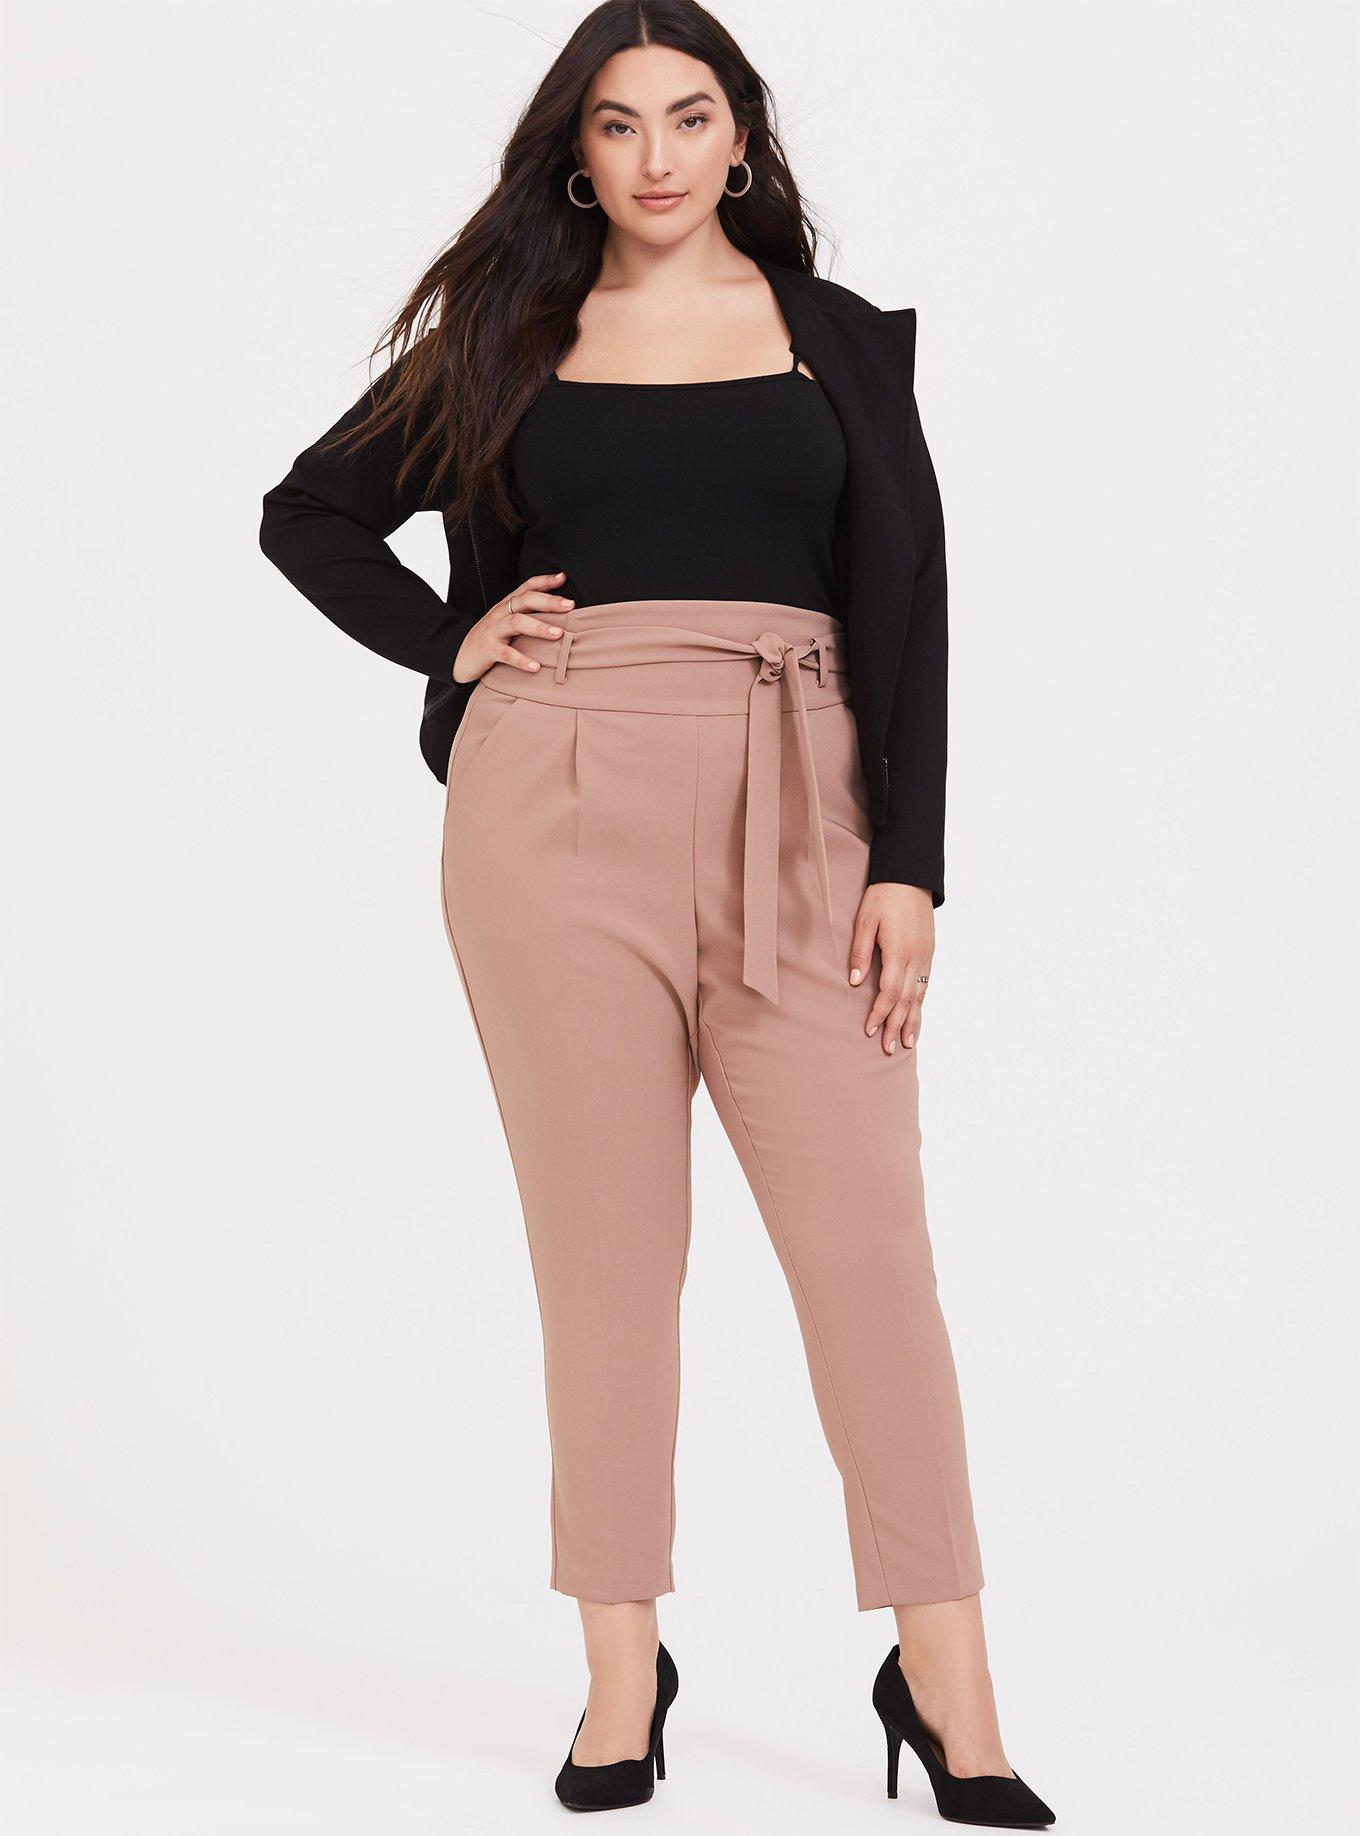 Plus Size - High Waisted Tie-Front Skinny Pant - Taupe - Torrid